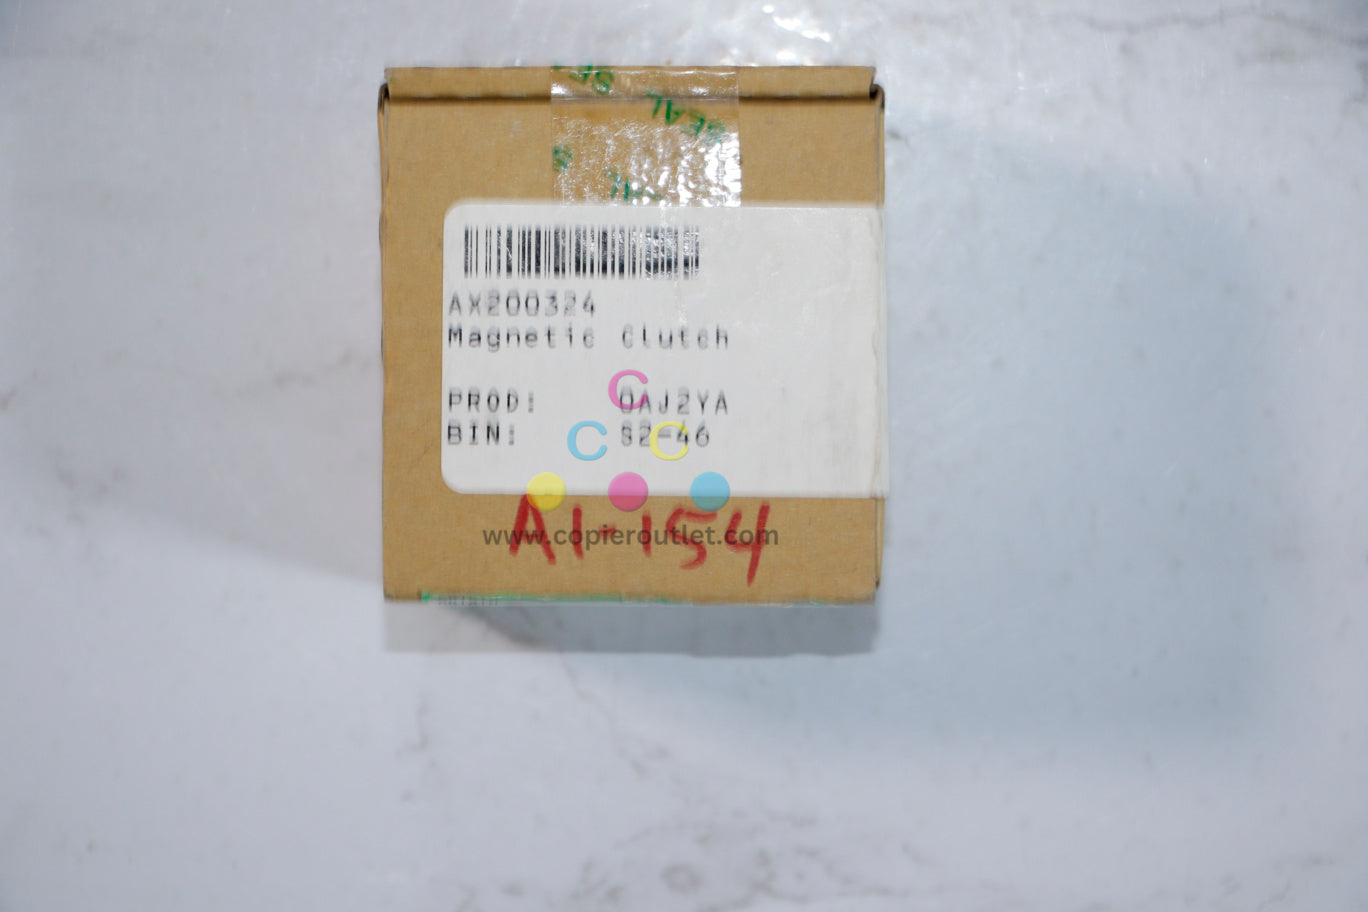 New OEM Ricoh MP 2352SP,MP 2852 Electromagnetic Clutch AX20-0324(AX200324)